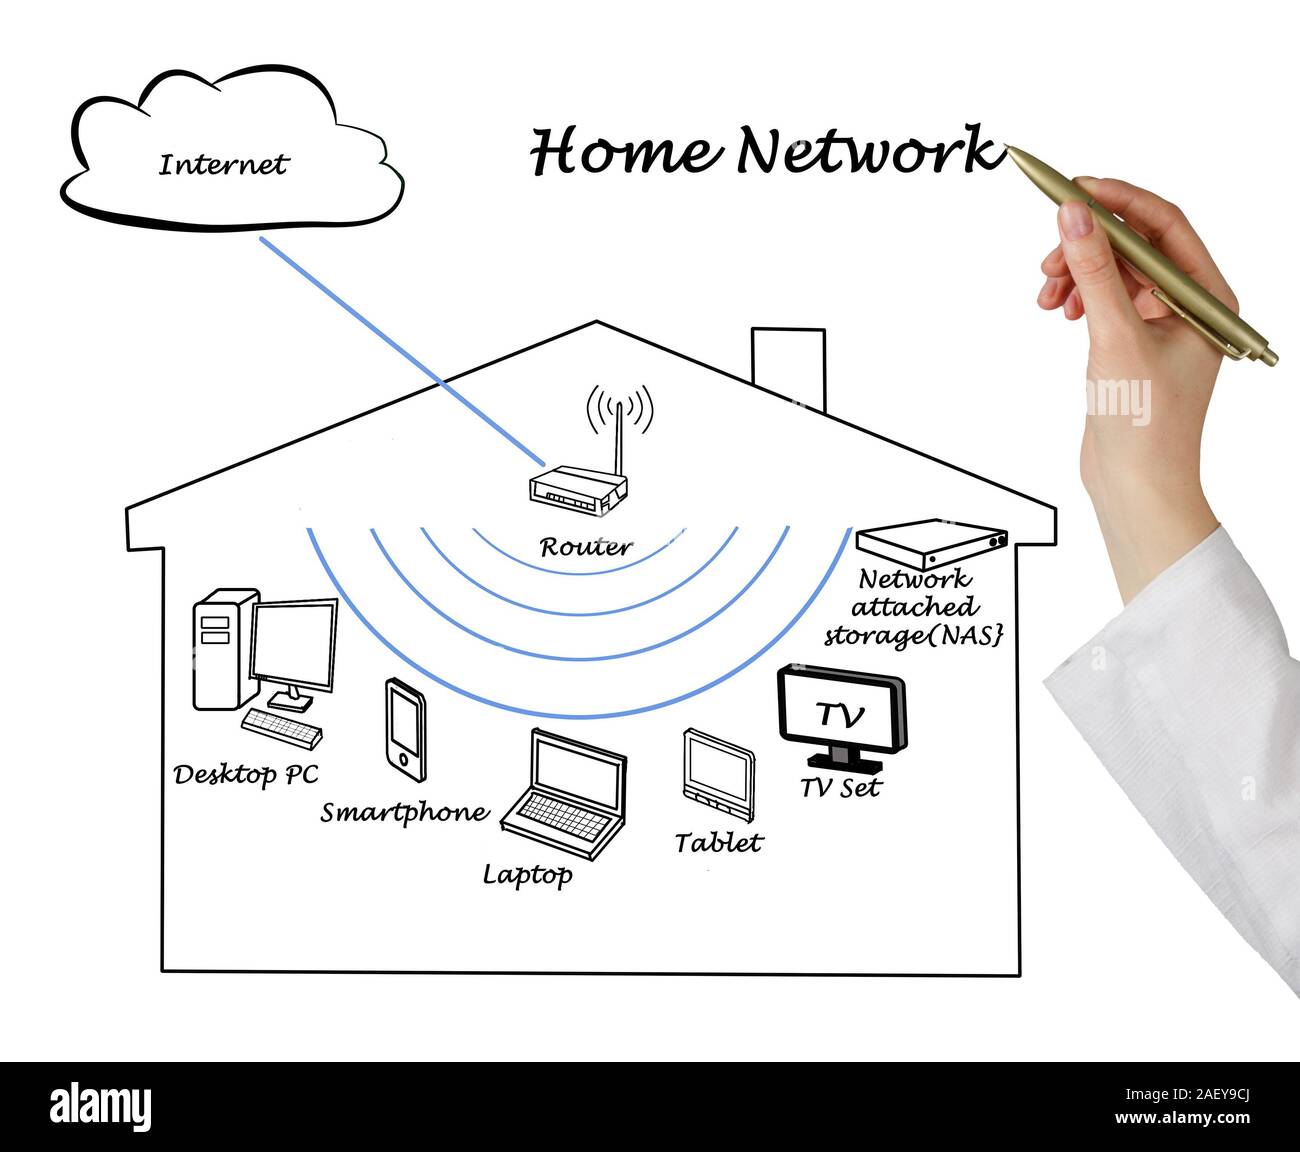 Home Network Stock Photo